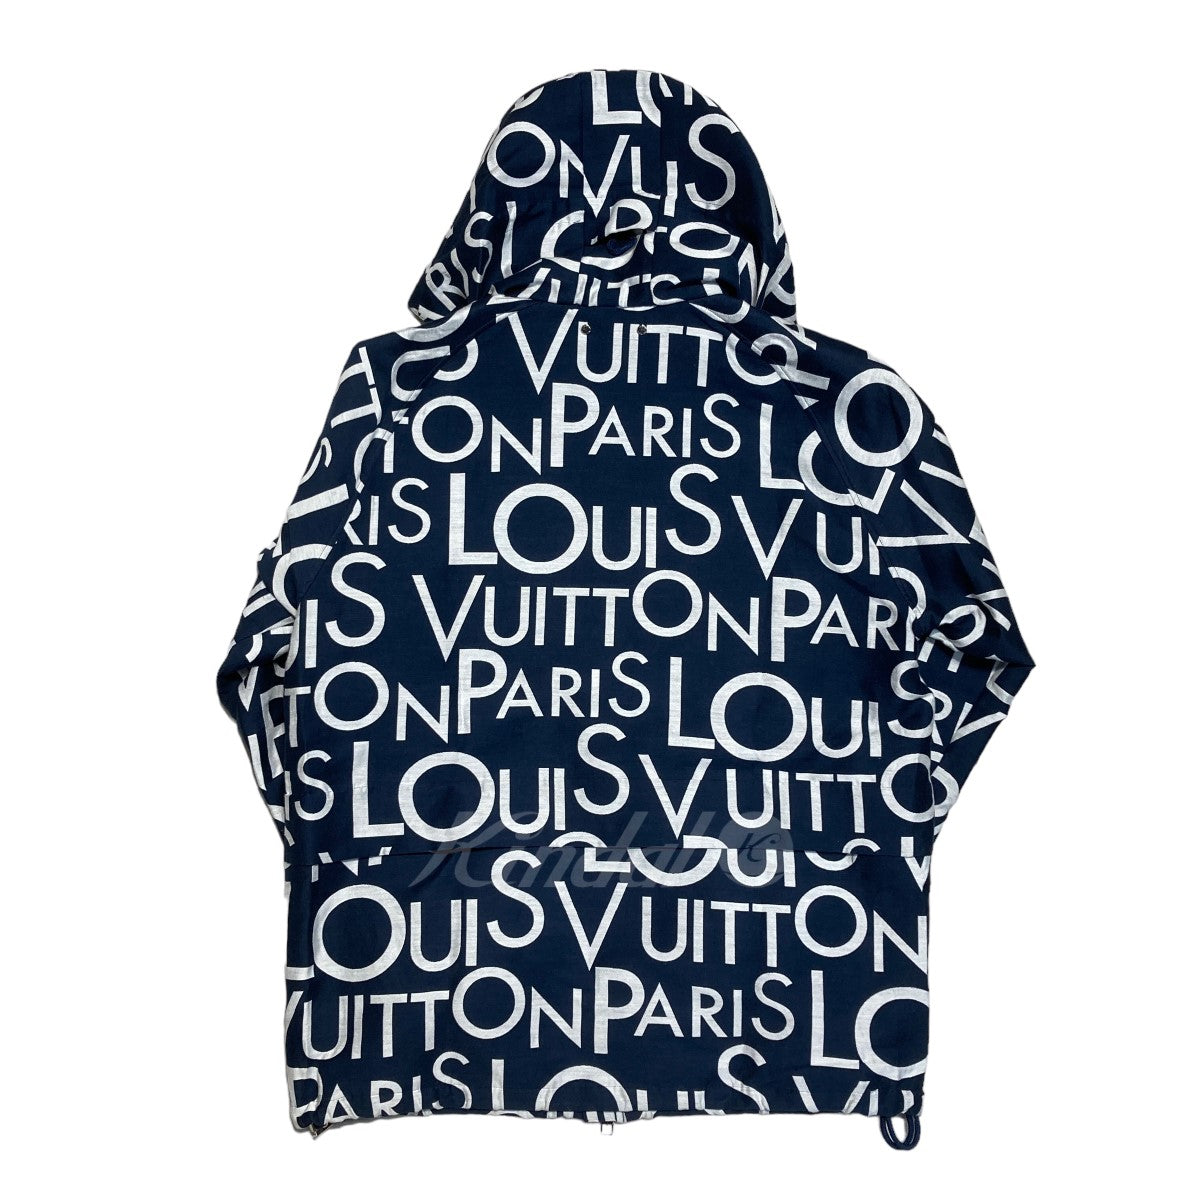 LOUIS VUITTON(ルイヴィトン) Galaxy Packable Jacket 総柄ジップ 